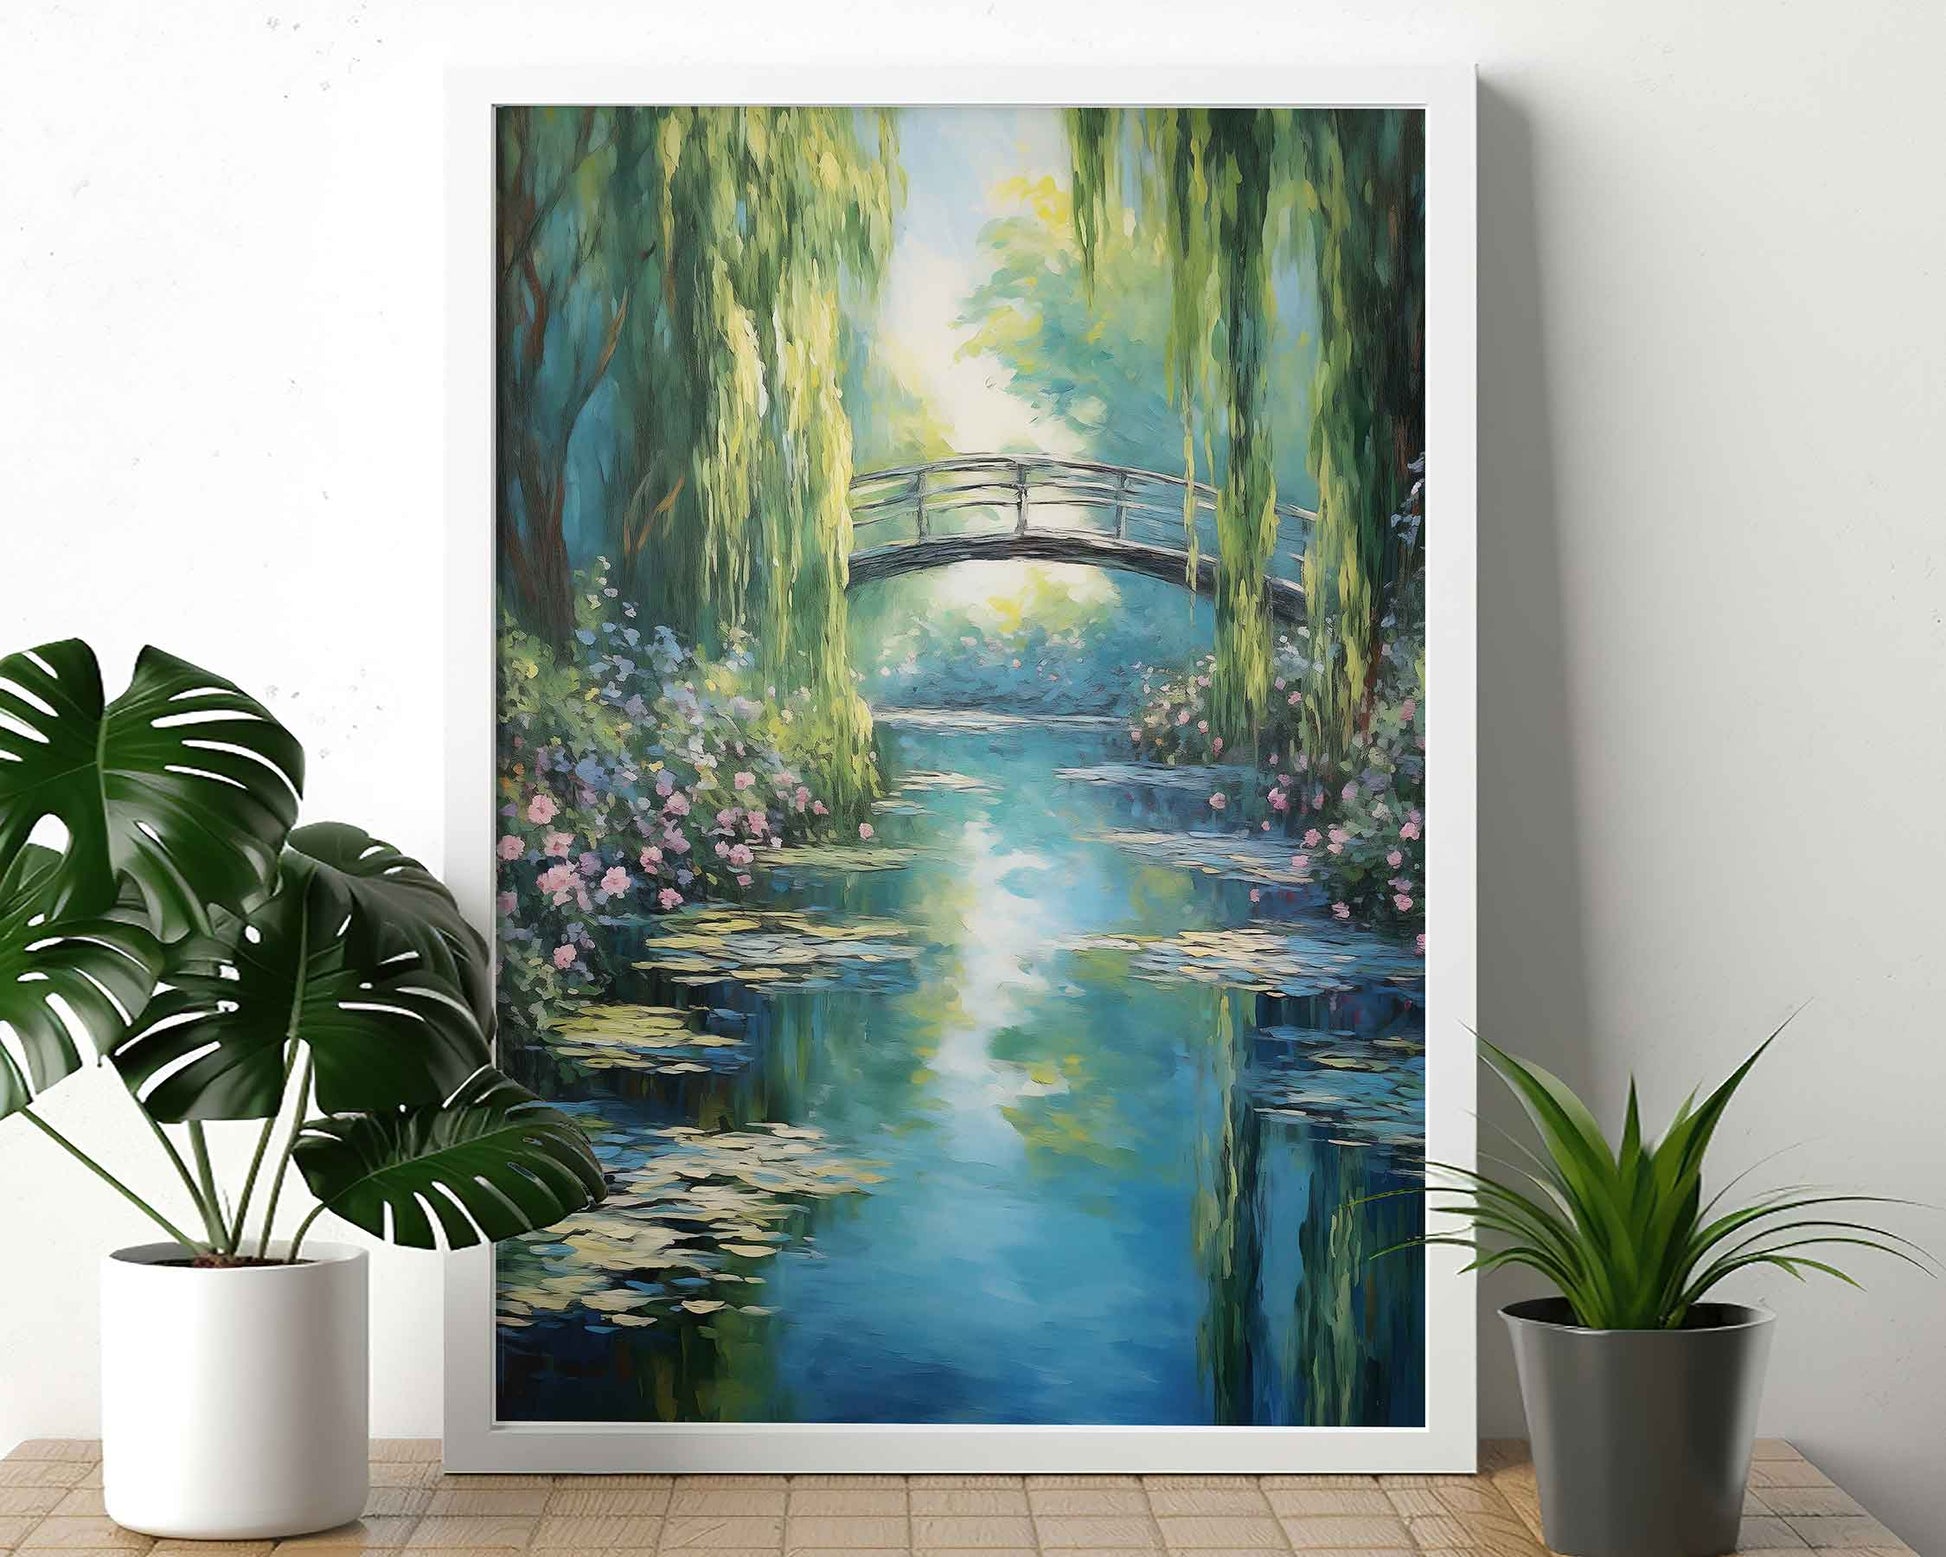 Framed Image of Monet Style Bridge With Pink Flowers Wall Art Print Poster